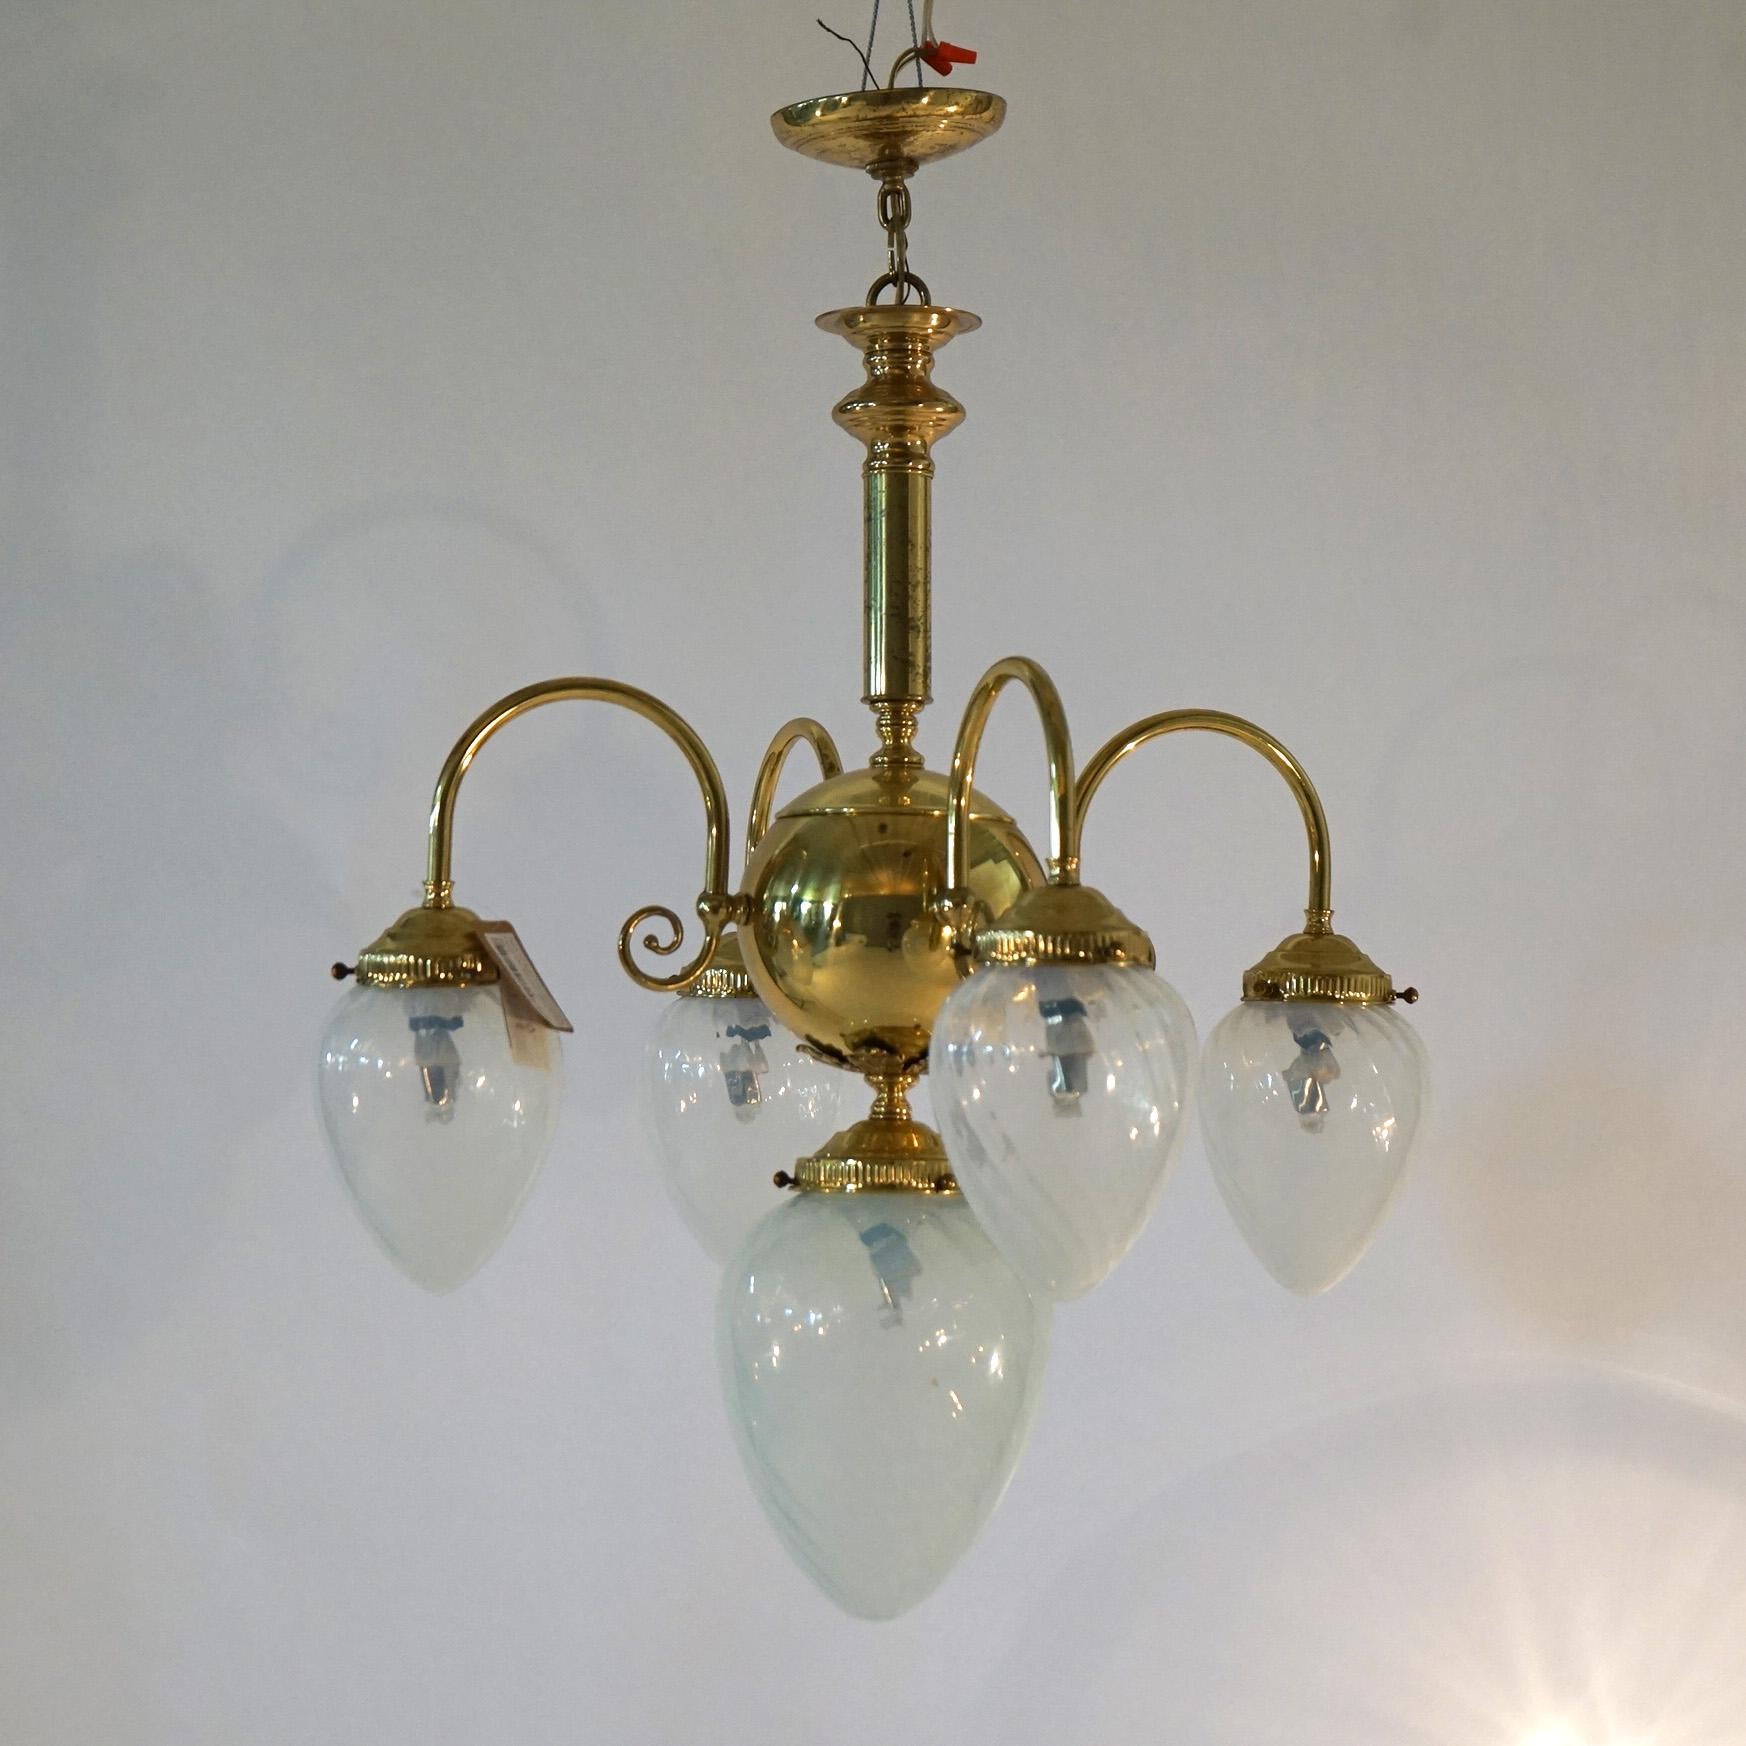 20th Century Brass Five-Light Hanging Fixture with Tear Drop Swirl Glass Shades 20th C For Sale